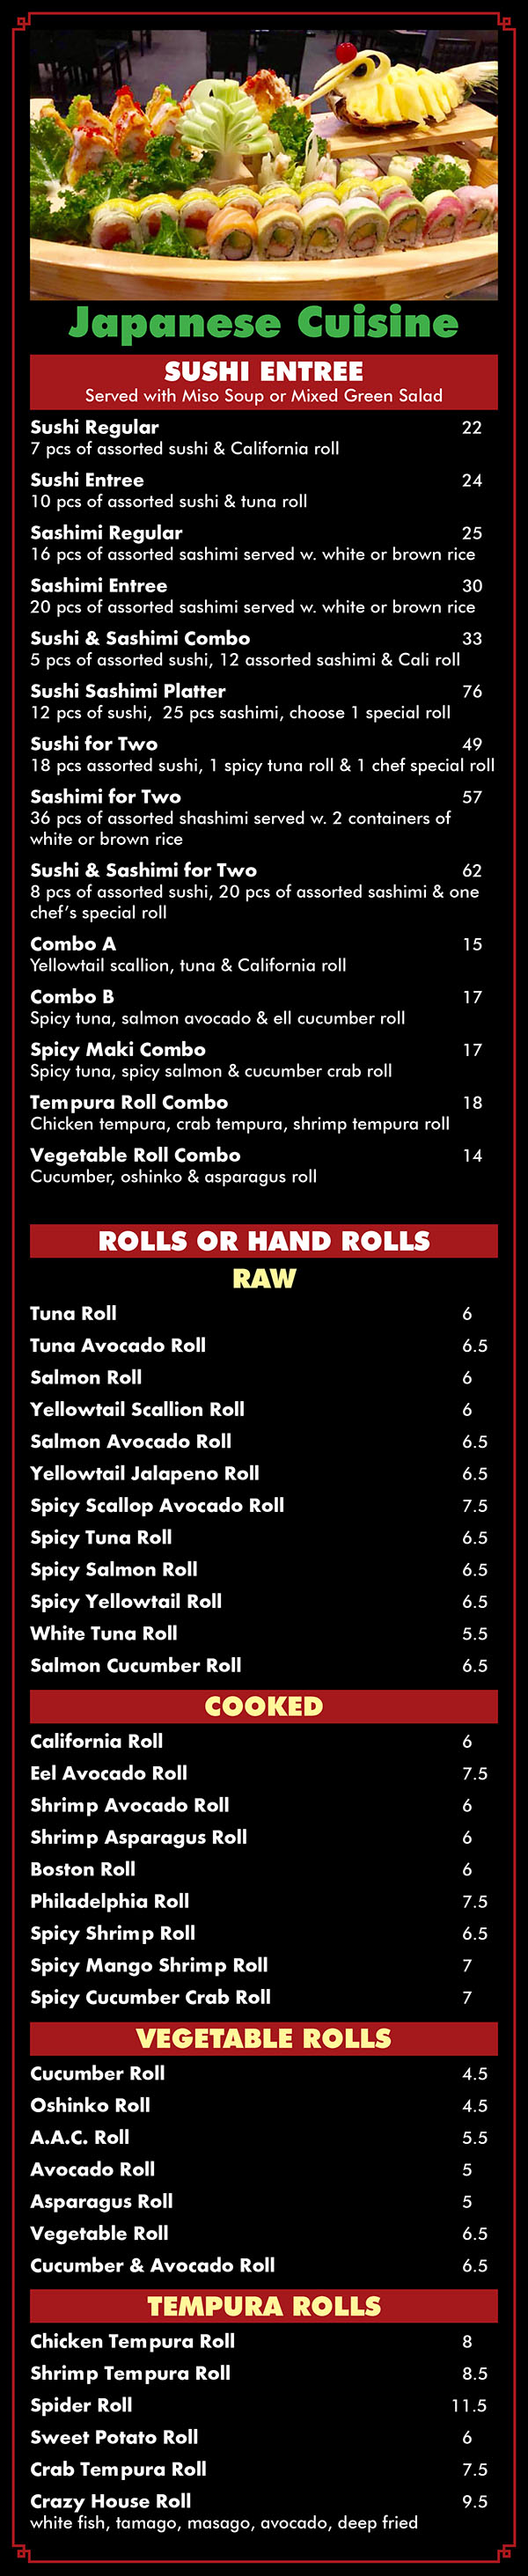 Asian Fusion Restaurant Menu Lincoln NE - Page 2
APPETIZERS 
1. Spring Egg Rolls (2) 
1a. Thai Egg Rolls(6) 
2. Chicken Egg Roll (2) 
3. Crab Rangoon (6) 
4. Shumai Steamed shrimp dumpling w. special sauce 
5. Edamame 4.5 
6. Gyoza (6) (Fried pork dumpling) 5.5 
7. Spicy Avocado Salad 7 Crabstick, tobiko, cucumber mixed w. spicy mayo 
8. Beef Negimaki 8 Scallion wrapped w. shoed beef, pan-fried in teriyaki sauce 
9. Tempura 9 Shrimp or vegetable gently fried in delicate batter 
10. Sashimi Appetizer (9 pcs) 12 
11. Yellowtail Jalapeno 9.5 
12. Avocado Ball 9 Spicy crab, yellowtail, tuna, and salmon wrapped in avocado ball 
13. Avocado Tartar 8 Deep fried roll, topped w. avocado, seaweed salad, crab meat, eel, spicy mayo sauce & masago on top 

SOUP (w. Crispy Noodles) Pt. Qt. 
14. Egg Drop Soup 2 4 
15. Wonton Soup 2.5 5 
16. k Hot & Sour Soup
17. Chicken Noodle or Rice Soup 2.5 5 
18. Vegetable Soup 2.5 5 
19. Miso Soup 2.5 5 
20. House Special Soup (for 2) 6 BEEF (w. White Rice) Order 
21. Beef w. Broccoli 10 
22. Pepper Steak w. Onions 10 
23. Beef w. Mixed Vegetables 10 
24. Beef w. Snow Peas 10 
25. Hunan Beef 10 
26. ‘. Beef w. Garlic Sauce 10 27. k. Mongolian Beef 10 
